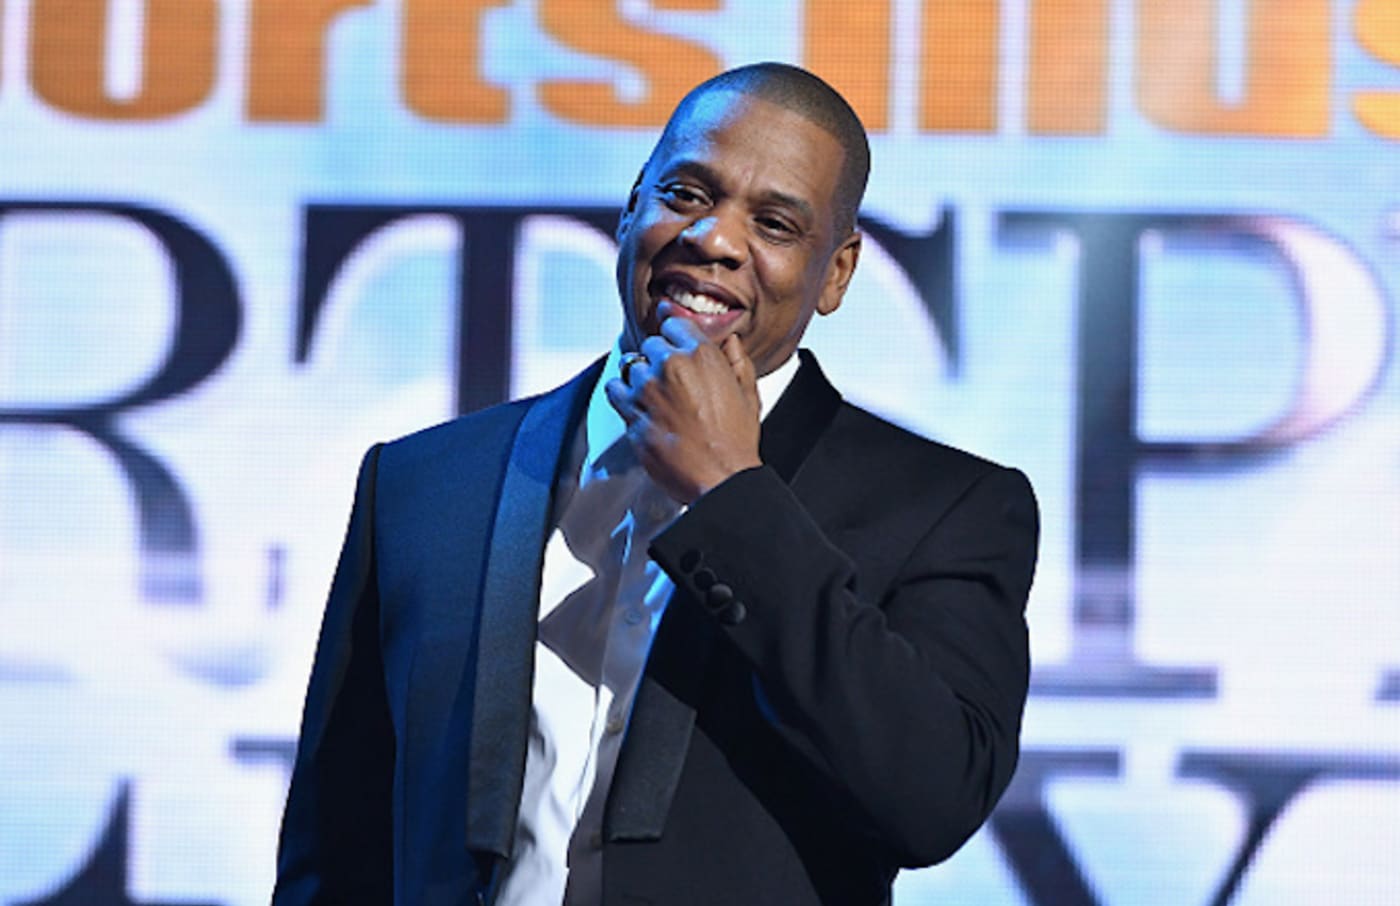 Jay Z speaks onstage during the Sports Illustrated Sportsperson of the Year Ceremony 2016